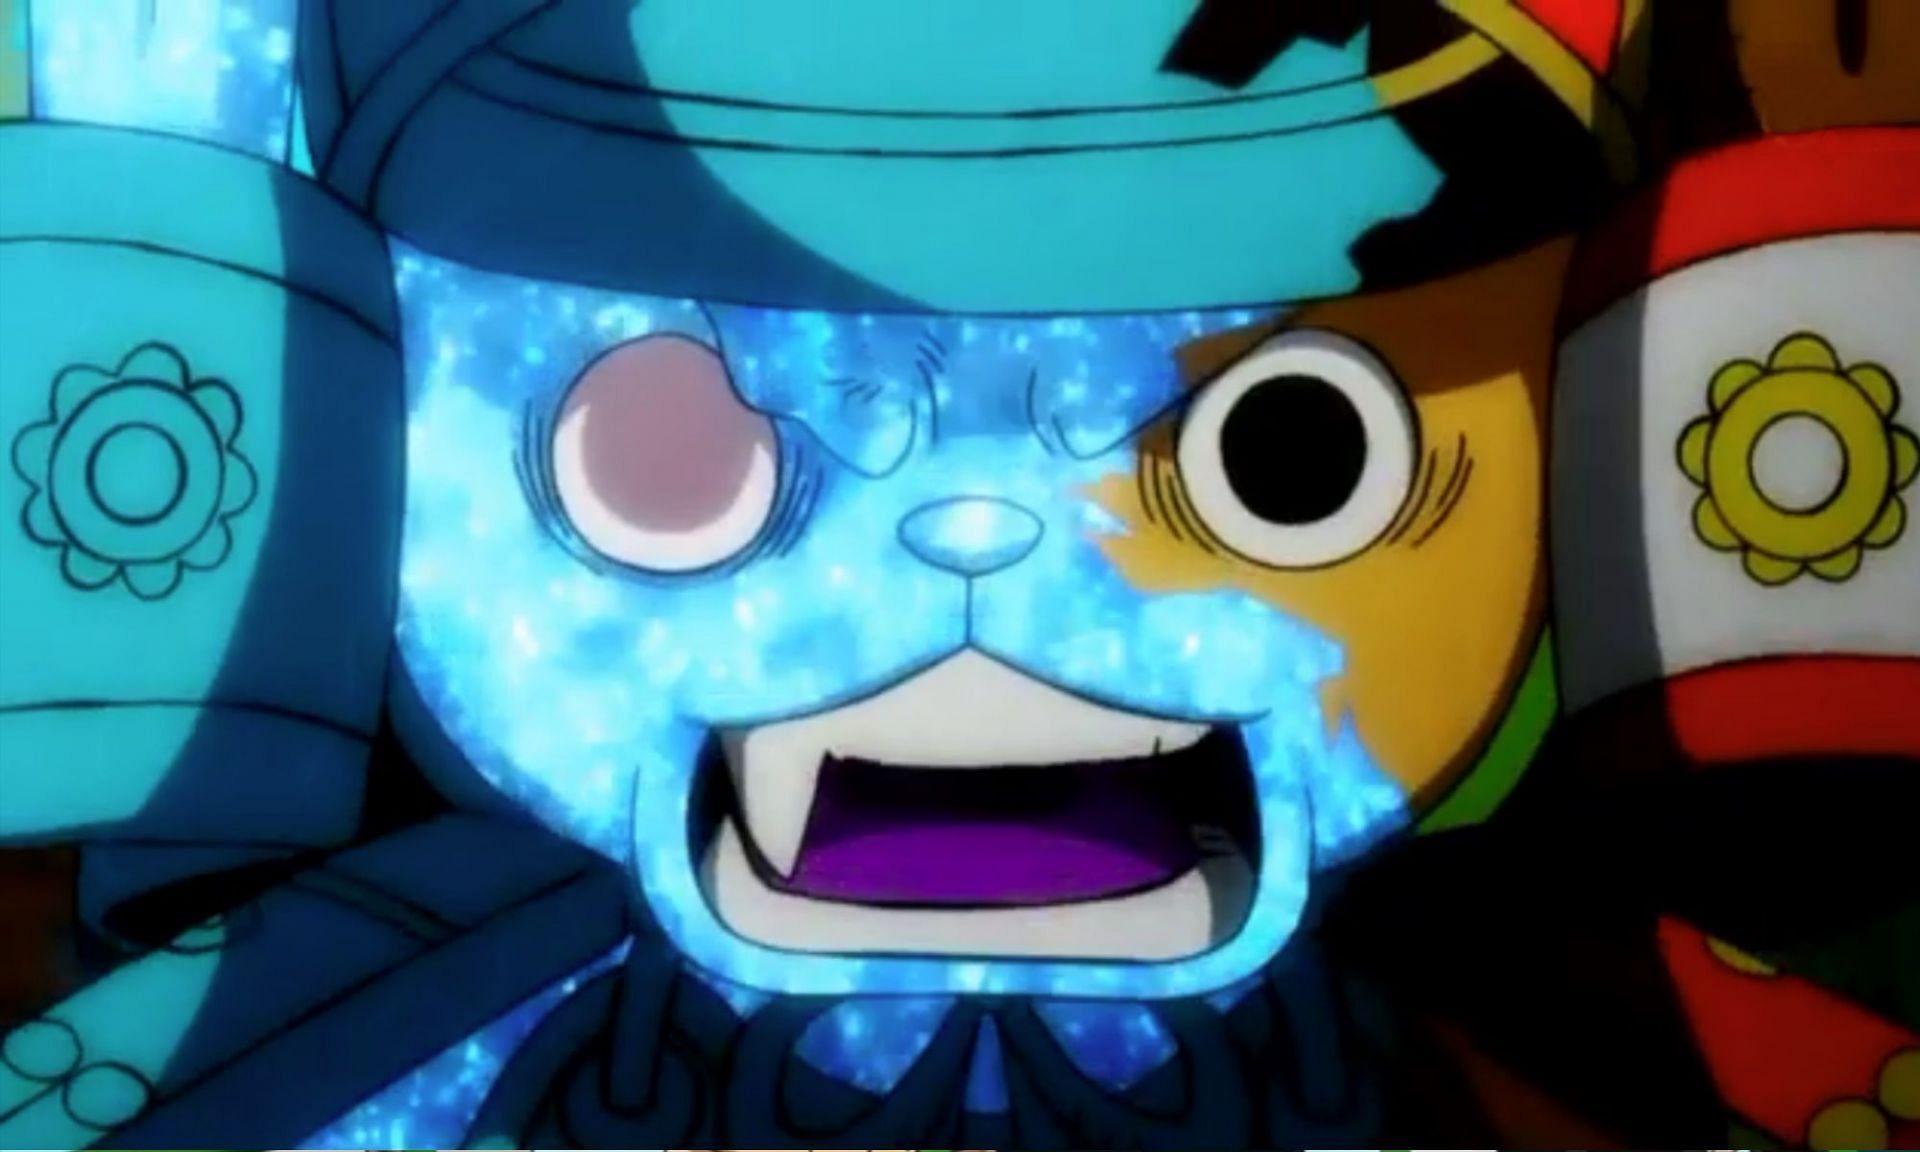 One Piece Episode 1022: Will Chopper succeed in his mission to